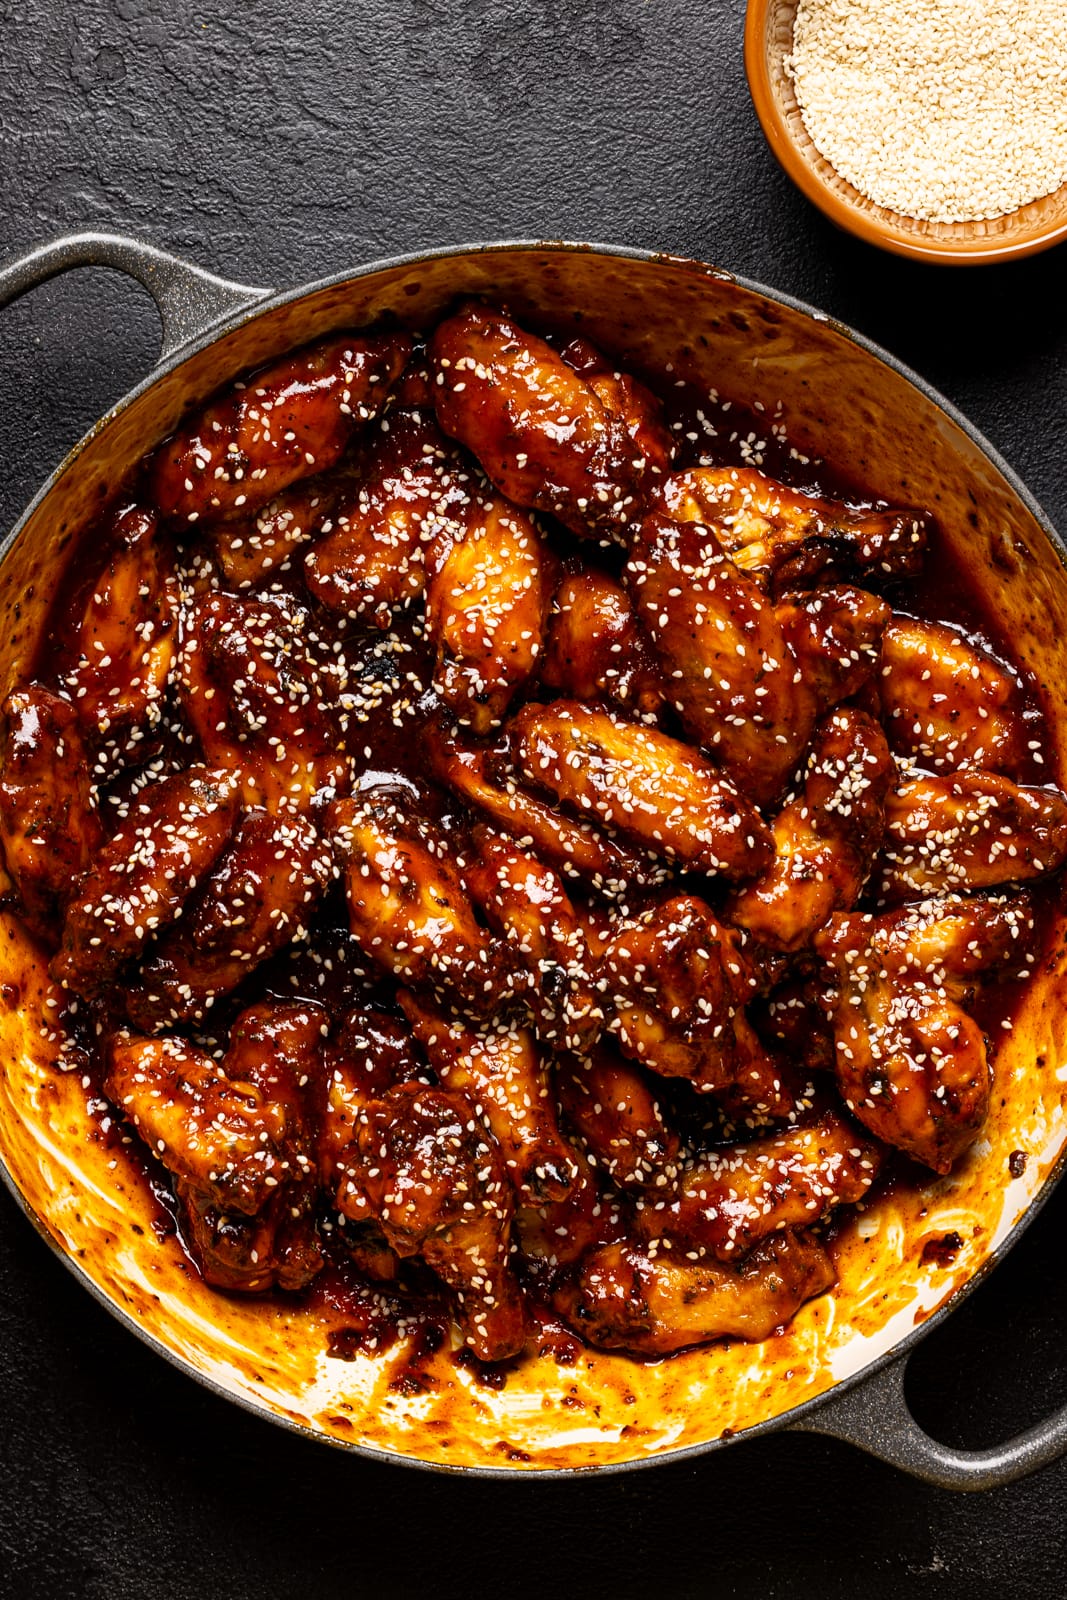 Large dutch oven filled with cooked chicken wings and sesame seeds.